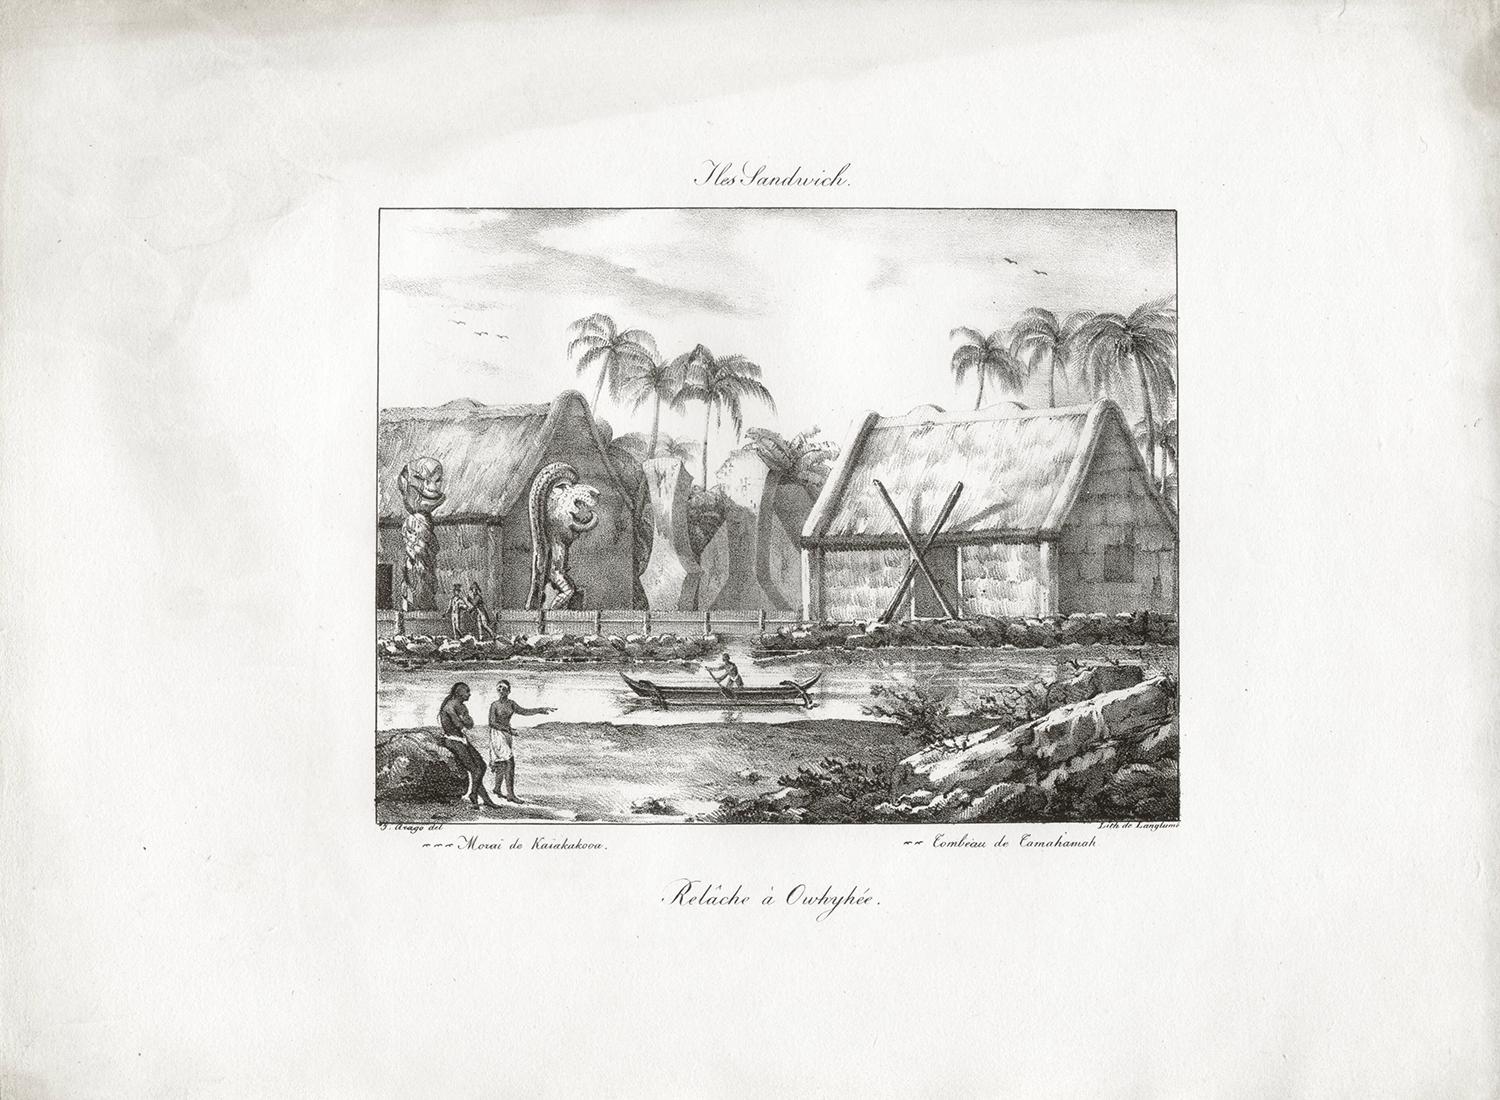 'Iles Sandwich - Relache a Owhyhee', Hawaii, antique lithograph print - Print by After Jacques Arago